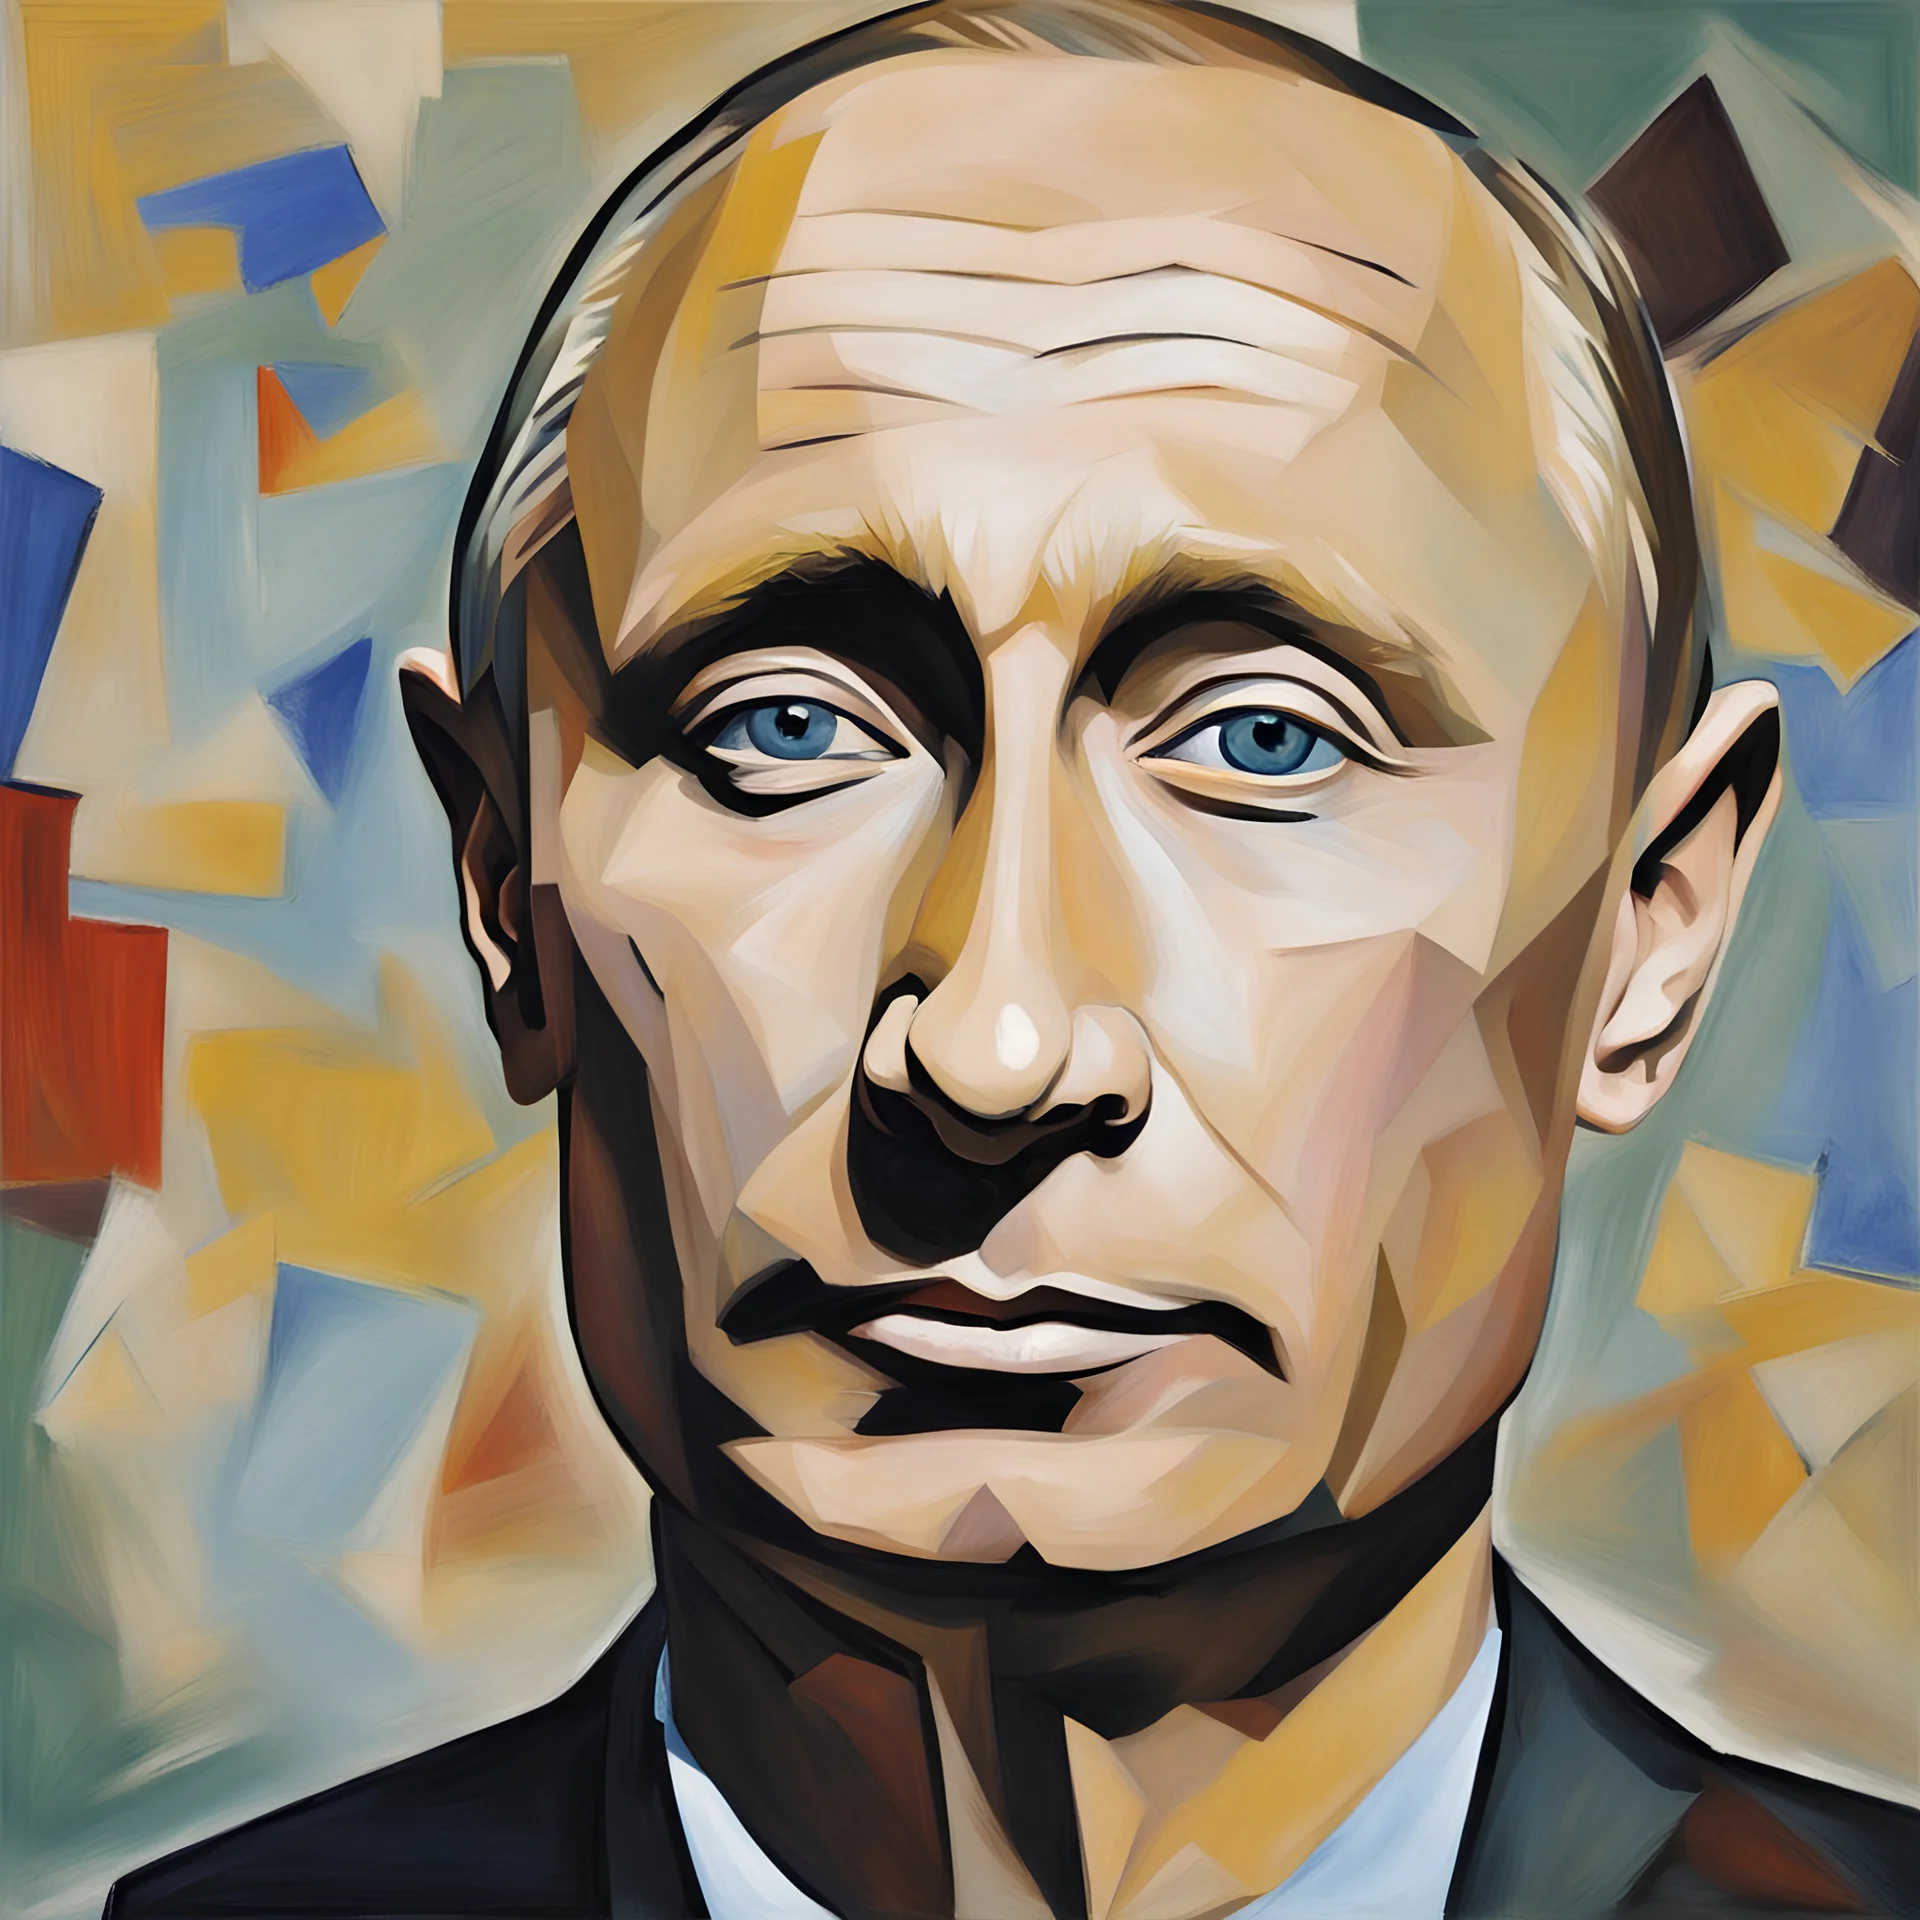 portrait of Vladimir Putin painted by Picasso